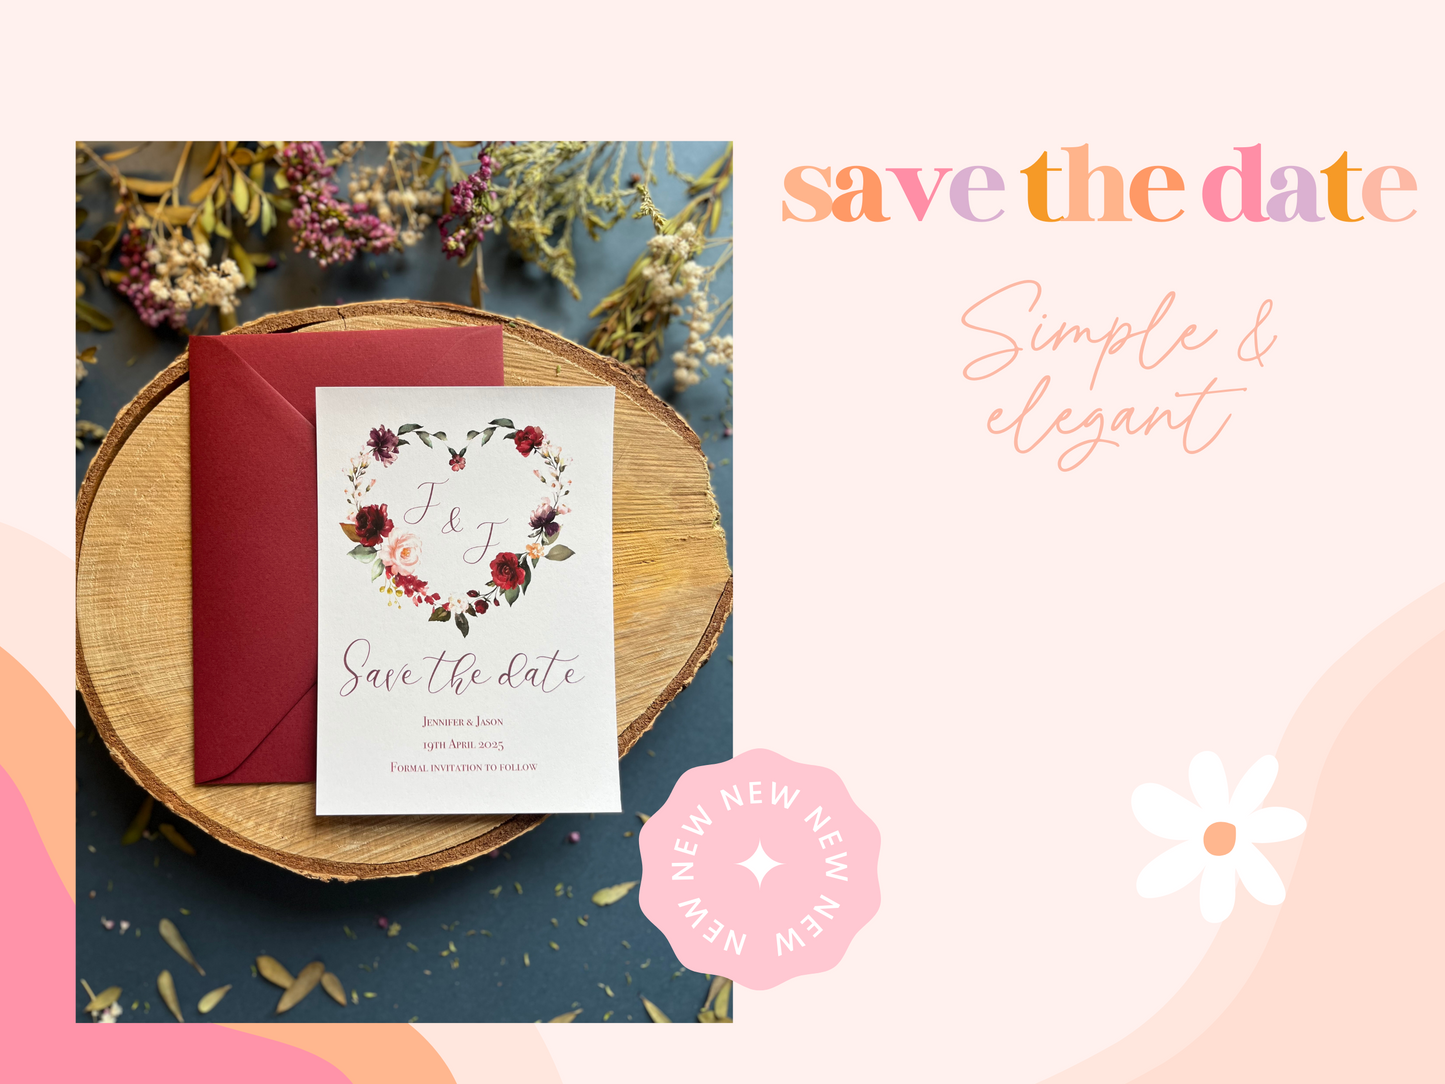 Heart Save the Date Card with Floral Design, Rustic Wedding Stationery